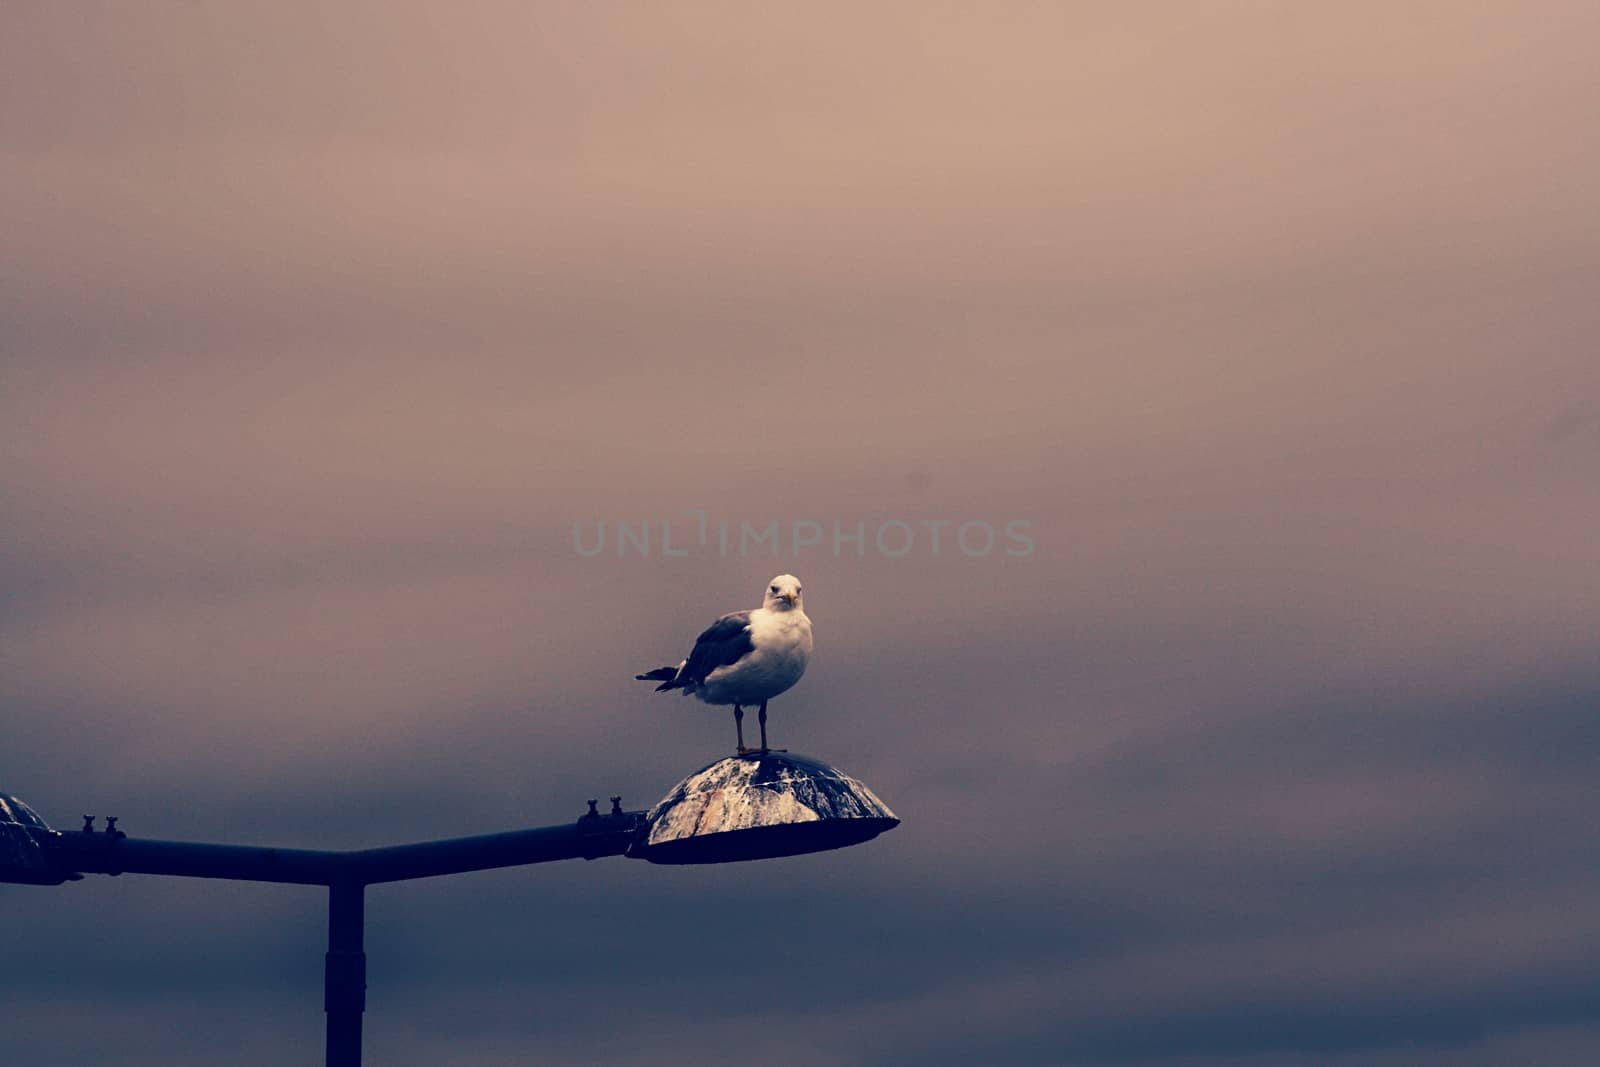 Photo of the bird on the lampHigh quality photo